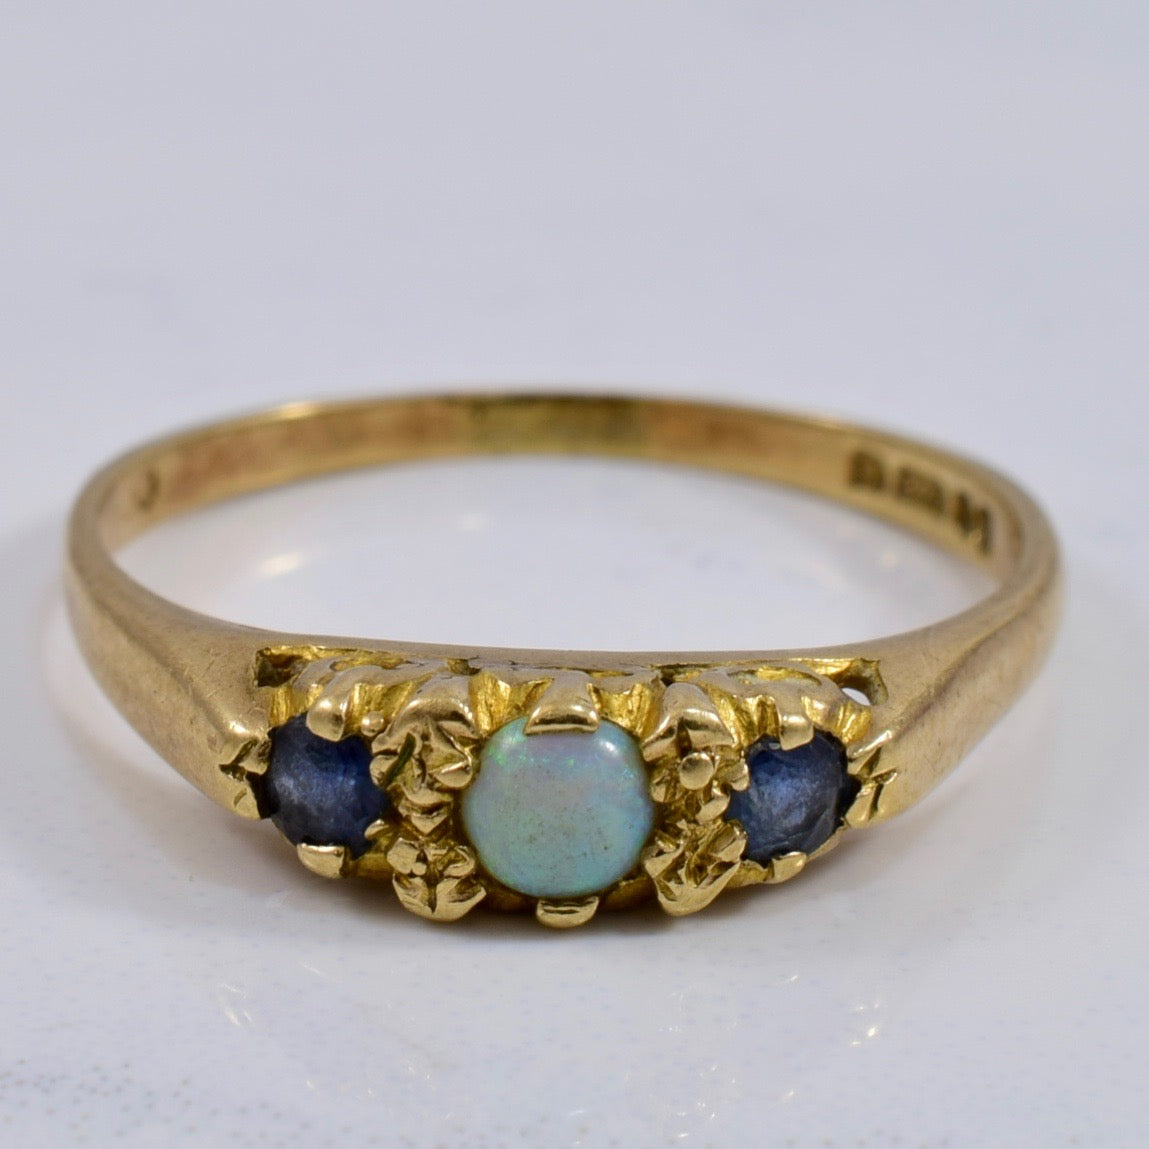 Early Victorian Era Opal and Sapphire Ring | 0.23 ctw SZ 7.75 |